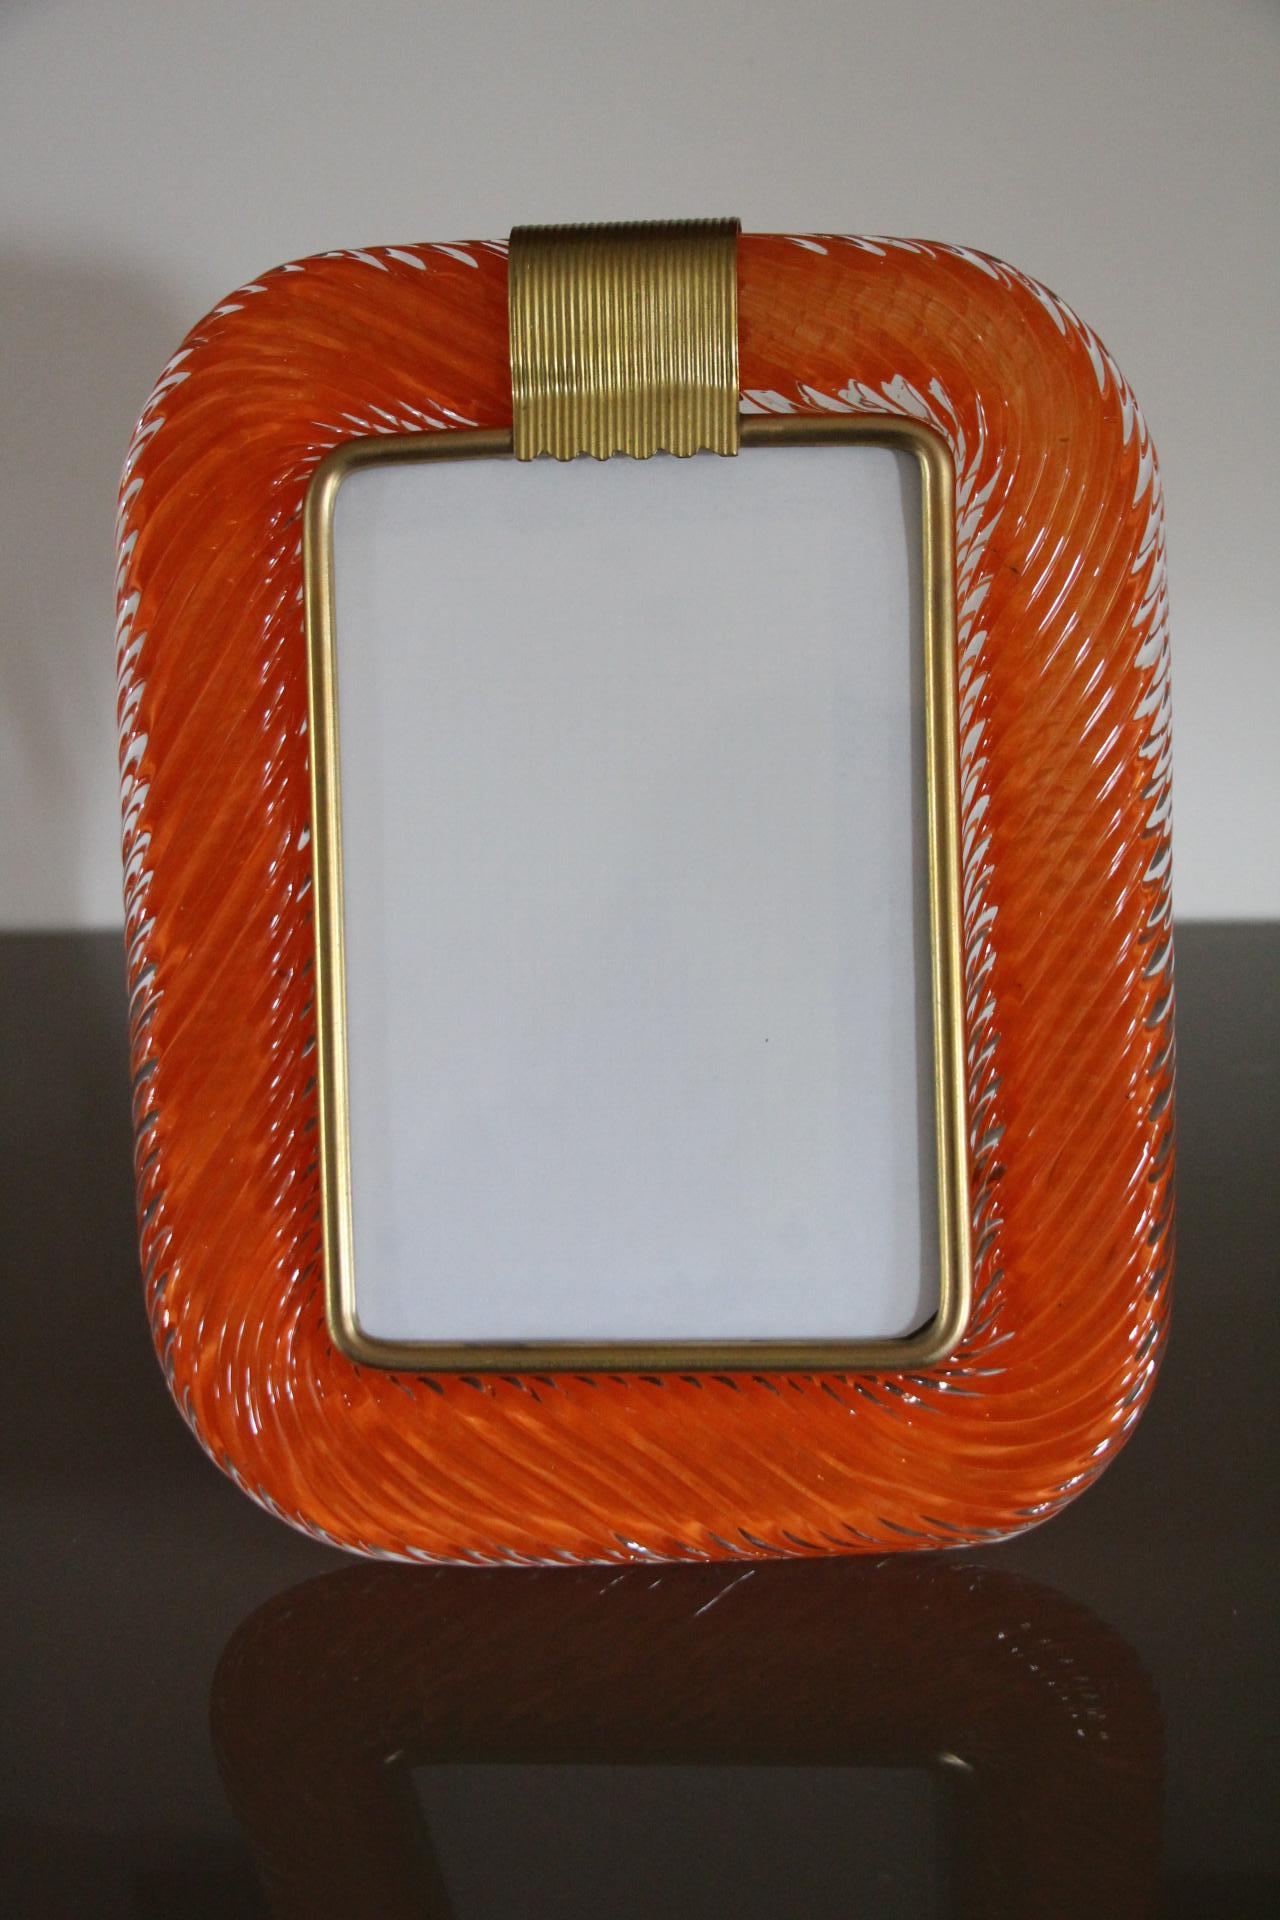 2000's Orange Twisted Murano Glass and Brass Photo Frame by Barovier e Toso 1